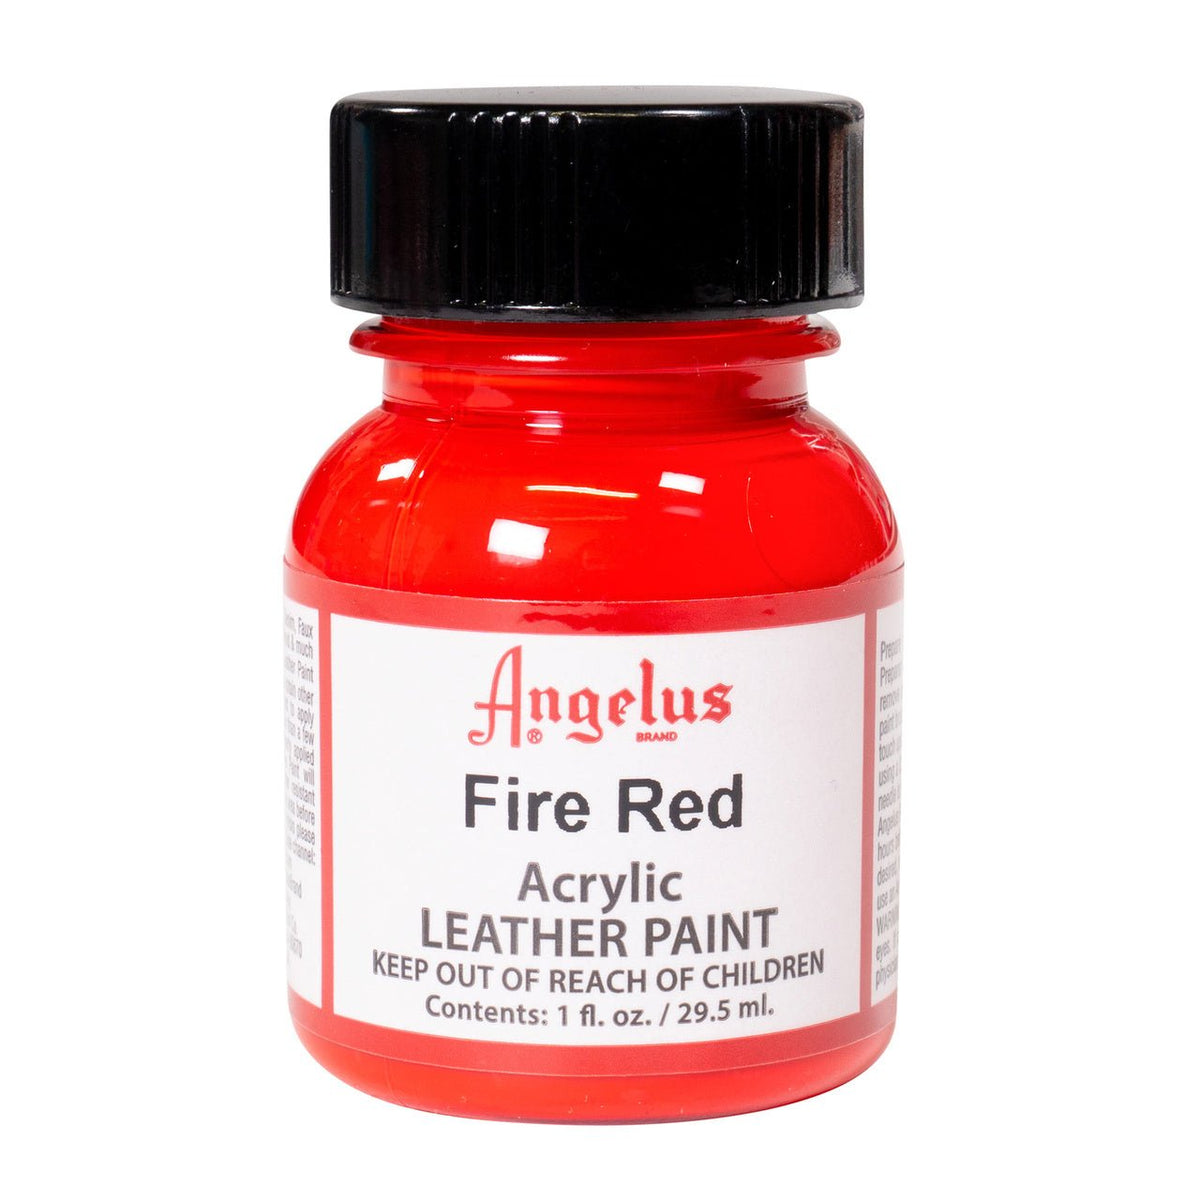 Angelus Acrylic Leather Paint - 1 oz. Bottle - Fire Red - merriartist.com